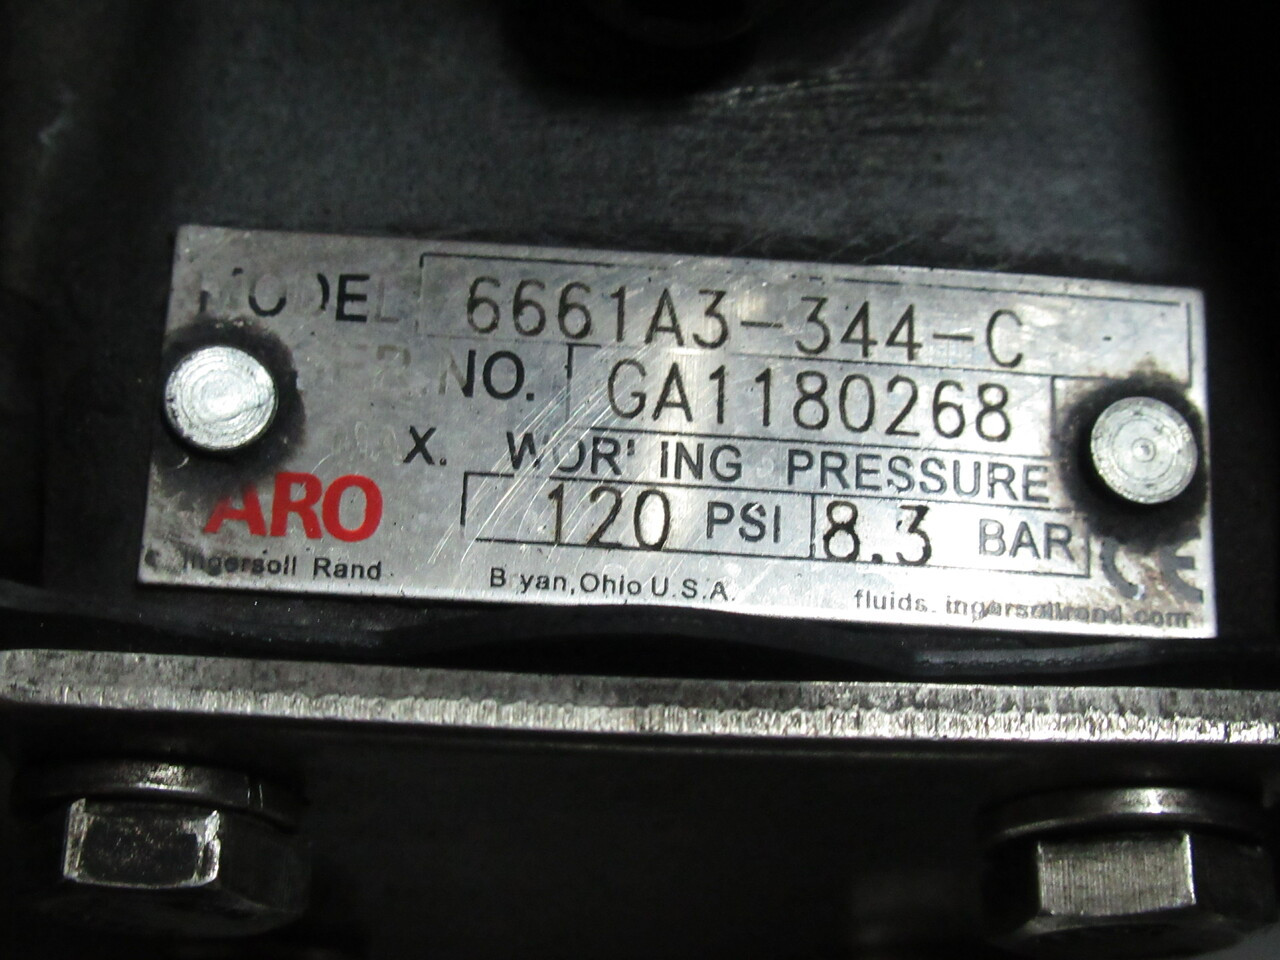 ARO 6661A3-344-C Diaphragm Pump 1" Connection 120PSI 8.3BAR USED